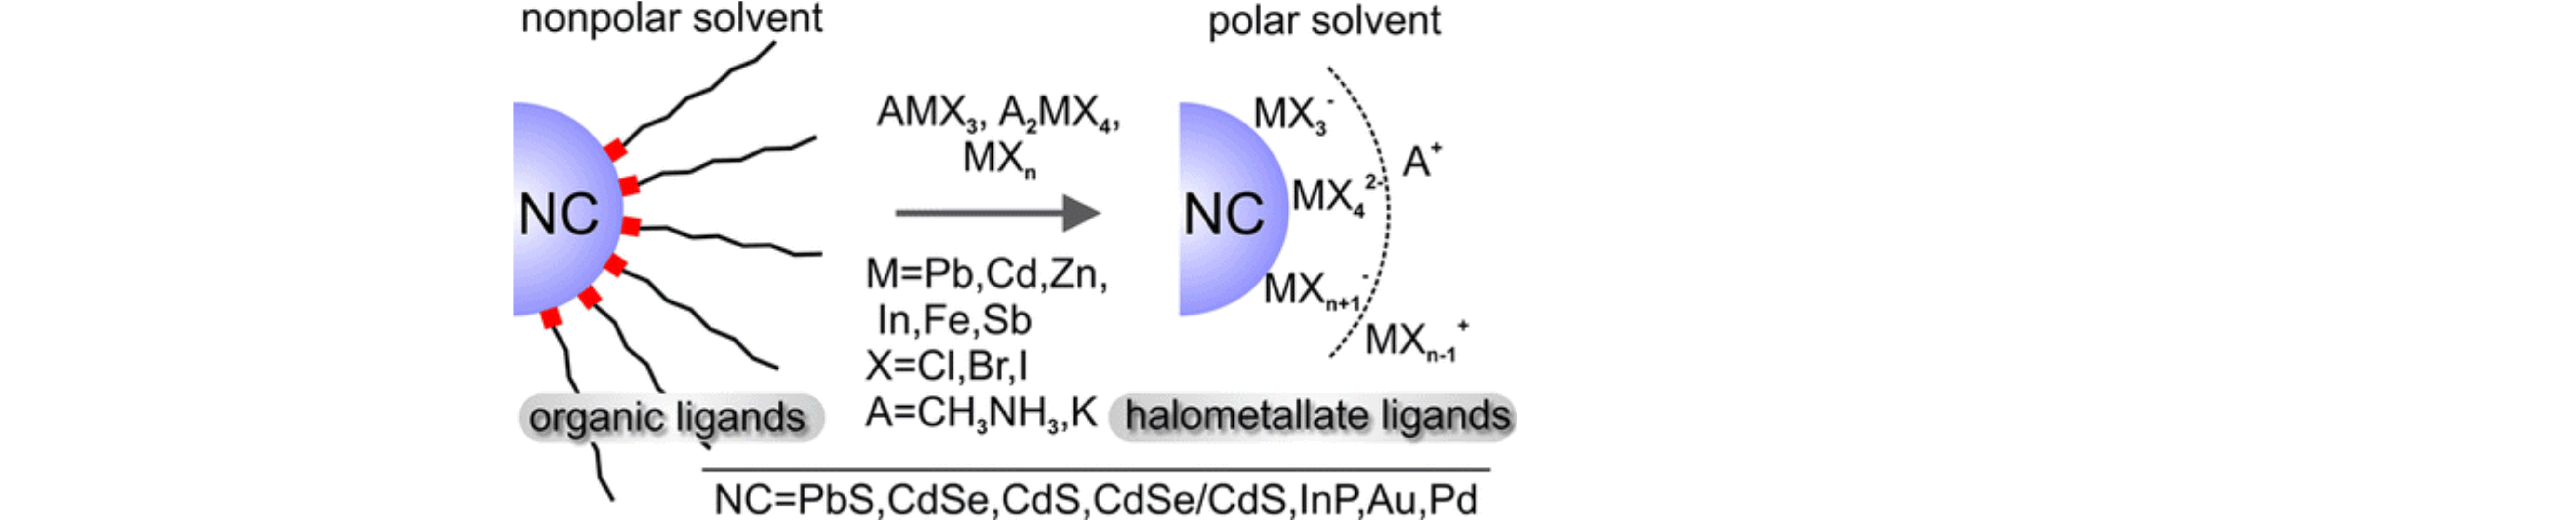 Lead Halide Perovskites and Other Metal Halide Complexes as Inorganic Capping Ligands for Colloidal Nanocrystals